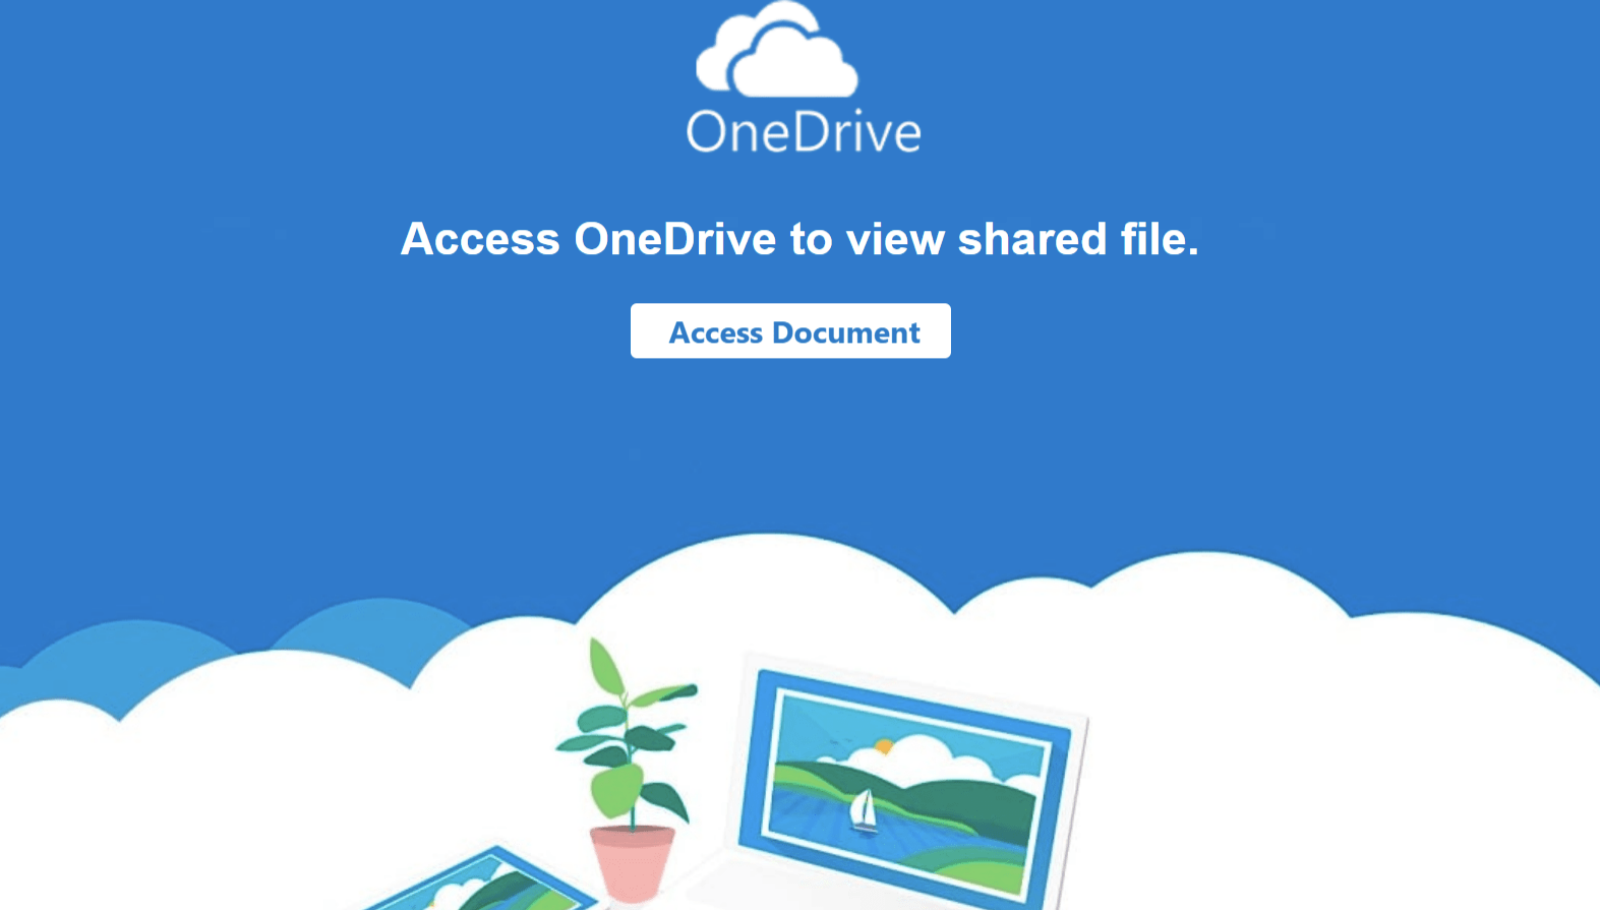 This shows a picture of a PDF file with a OneDrive logo, asking the user to click on “Access Document” to view the content of the file. 